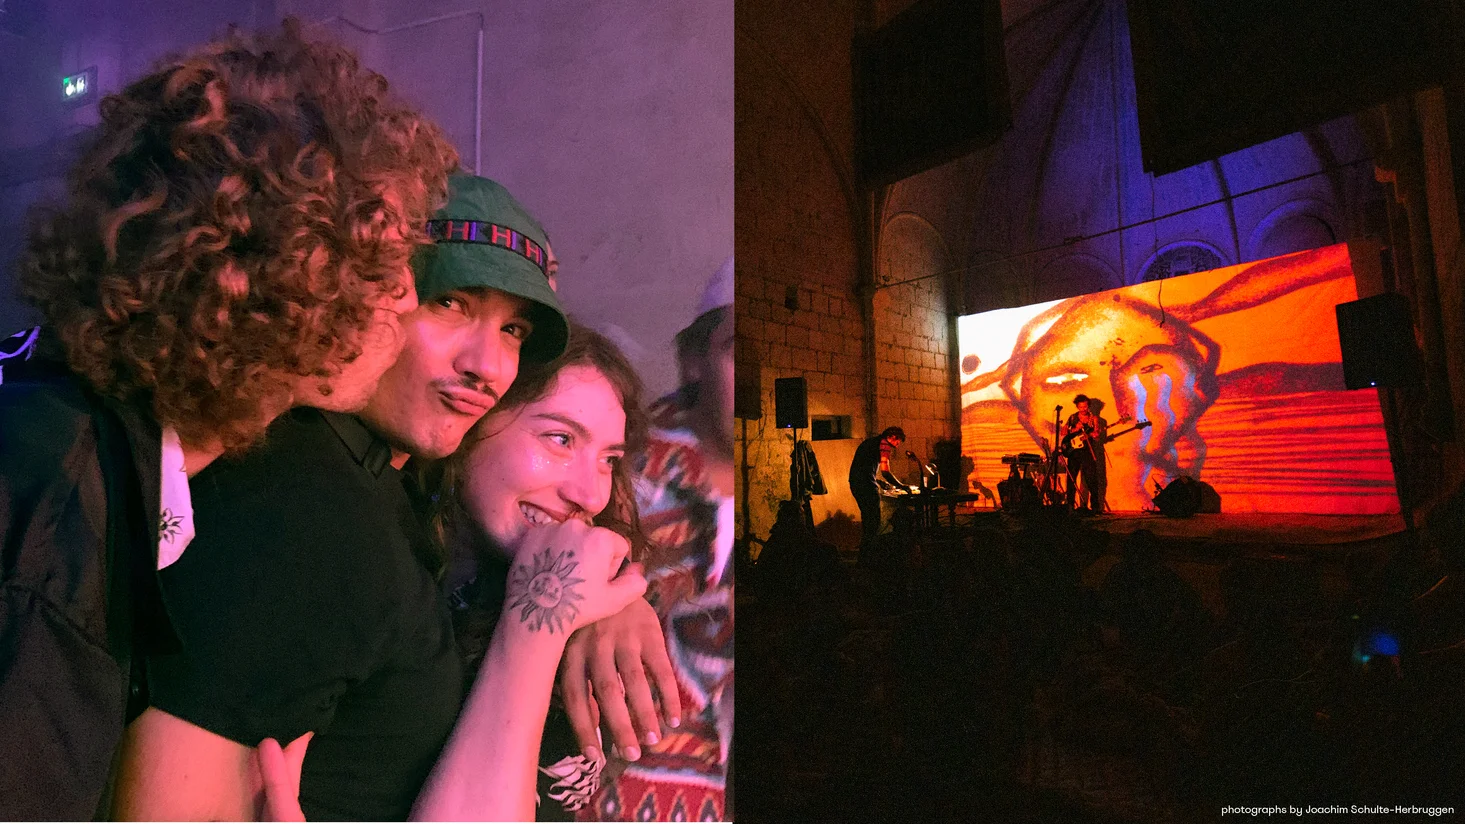 a photograph of people hugging and a photograph of an acoustic concert